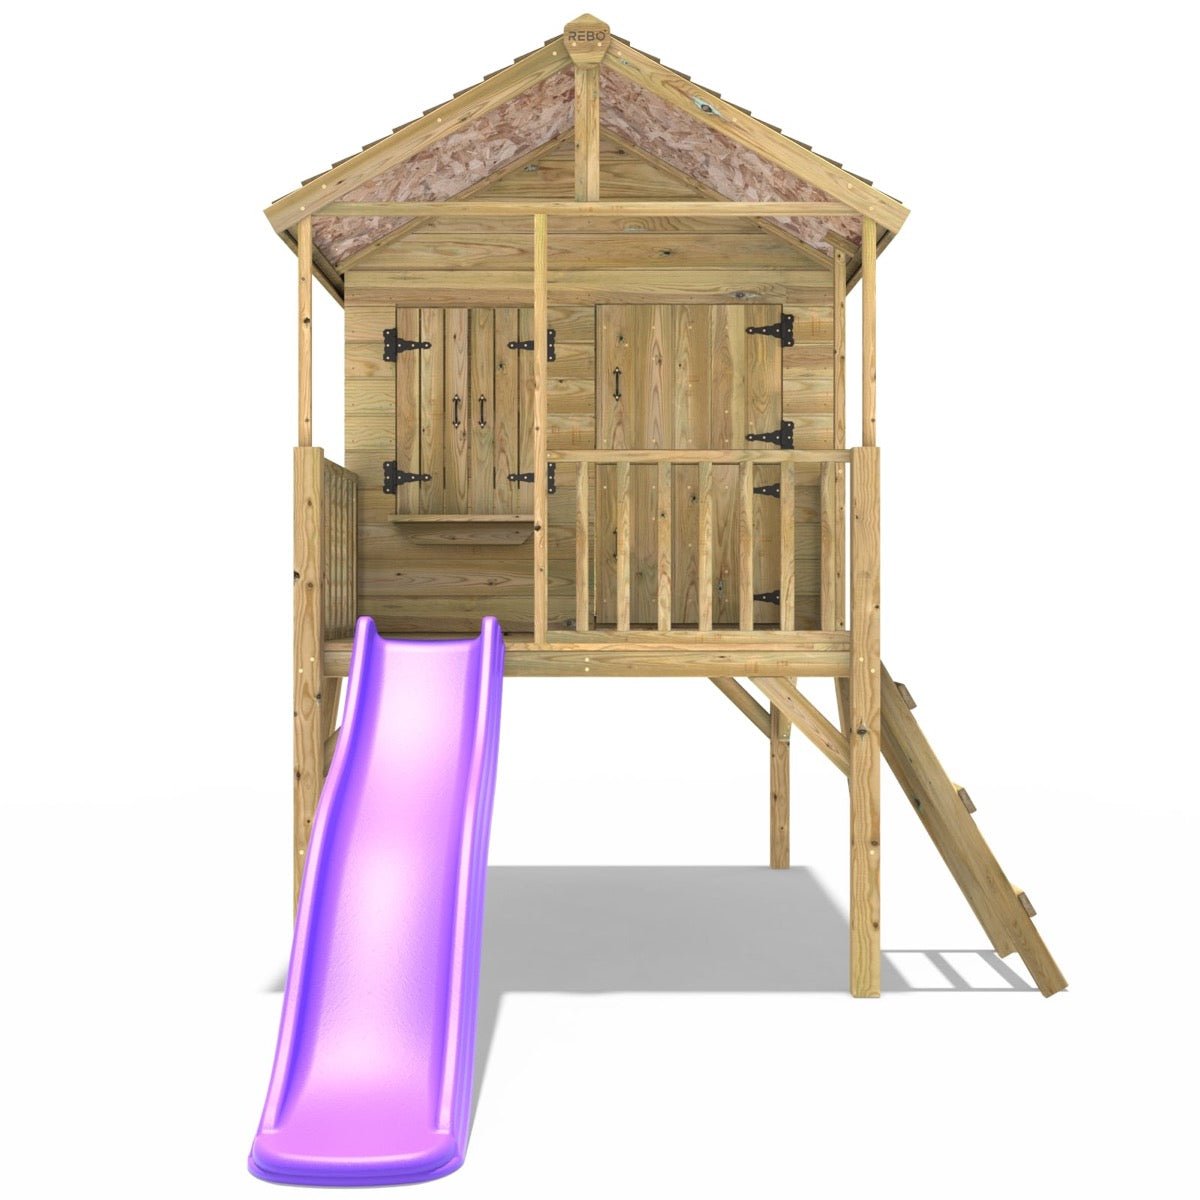 Rebo 5FT x 5FT Childrens Wooden Garden Playhouse on Deck with 6ft Slide - Falcon Purple